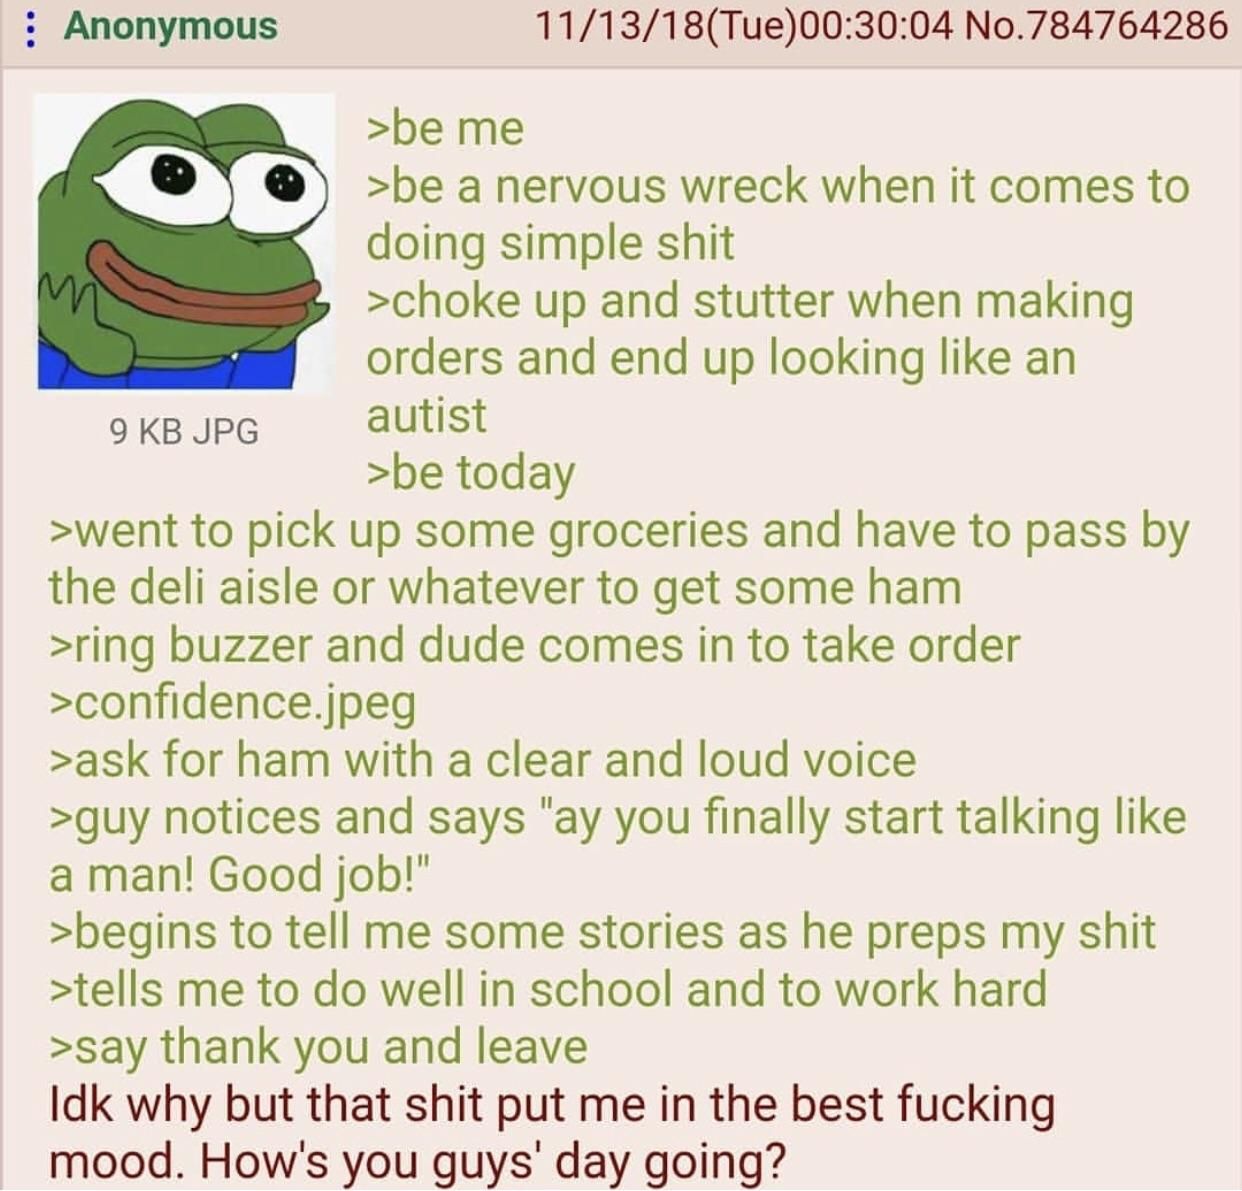 Anon is on the right track